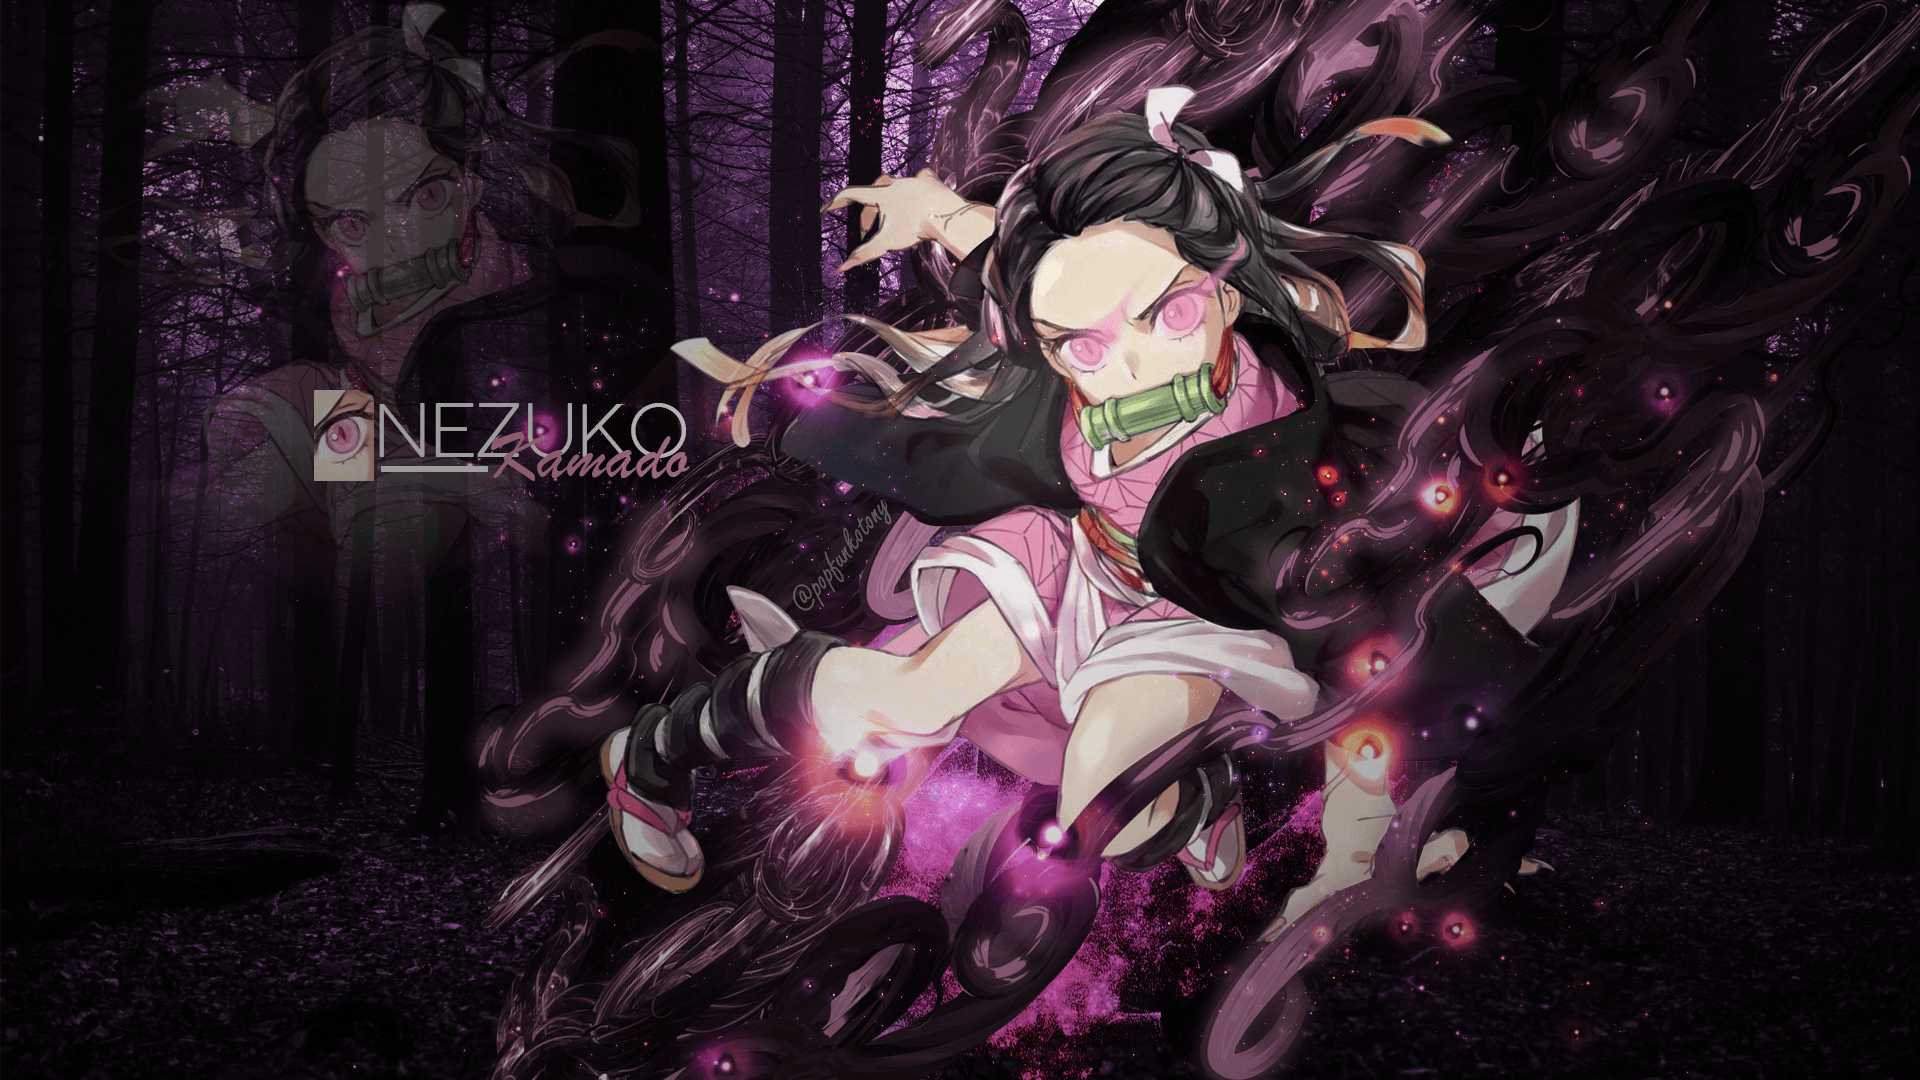 heres a wallpapers i created of our best girl 3 : Nezuko.